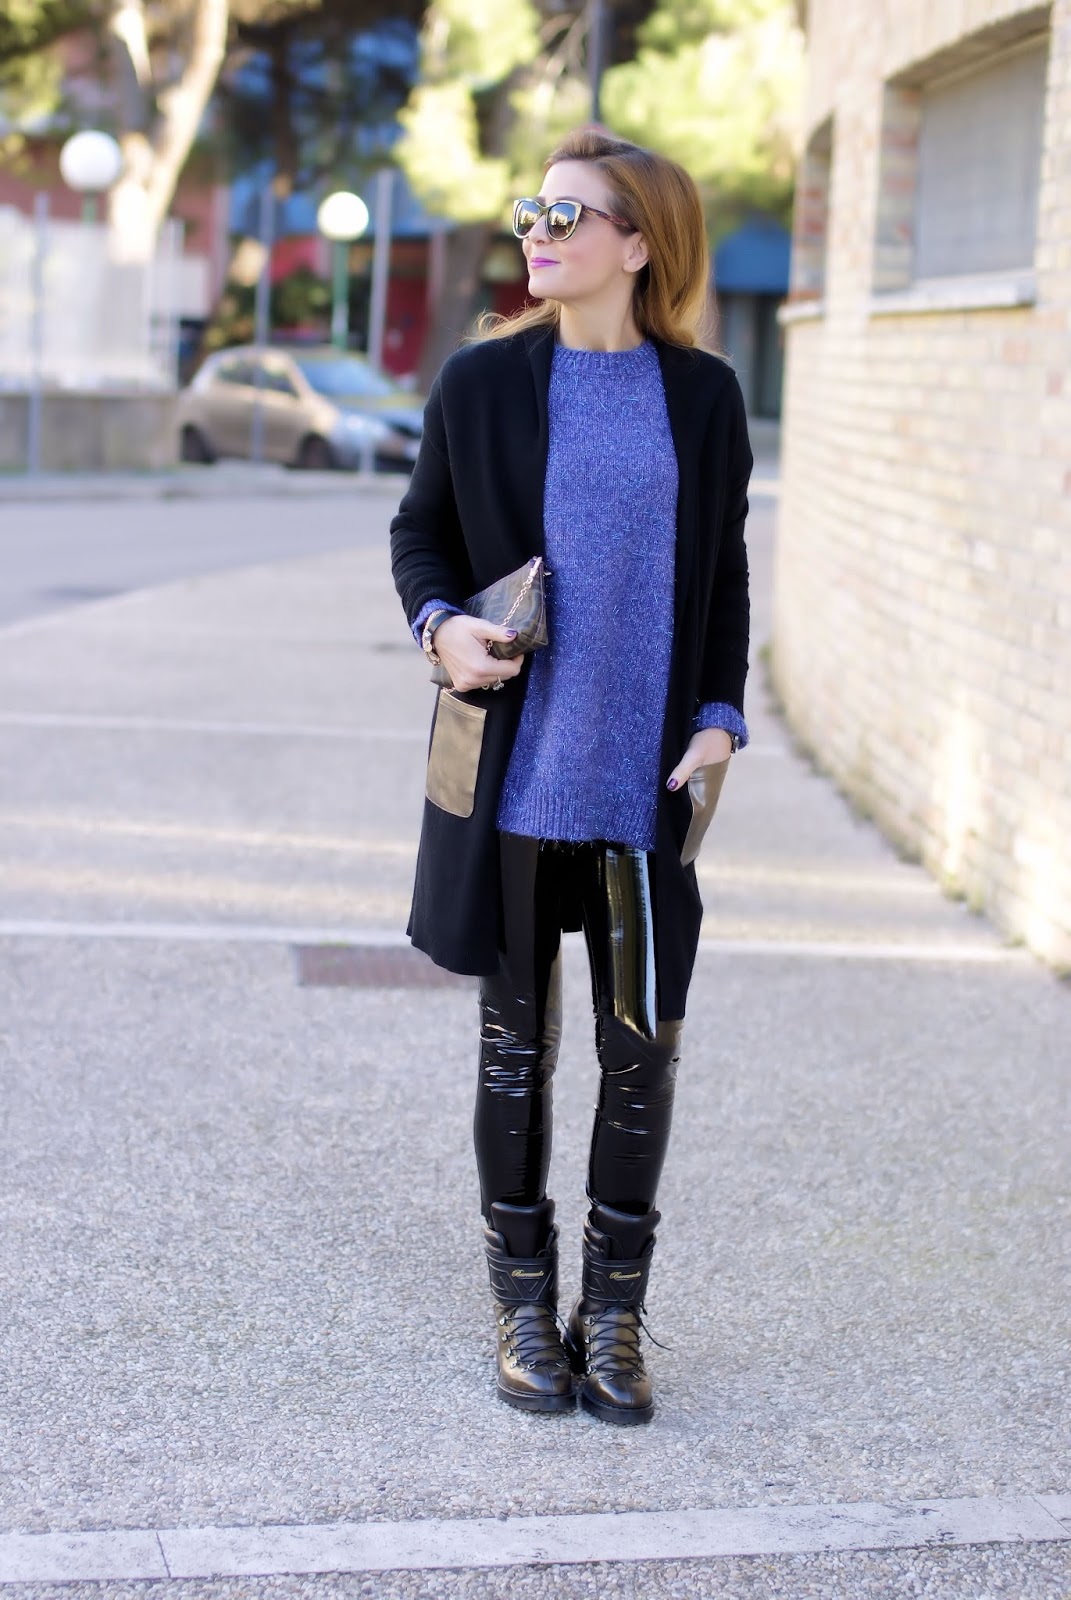 How to wear vinyl pants: my hooded cashmere cardigan